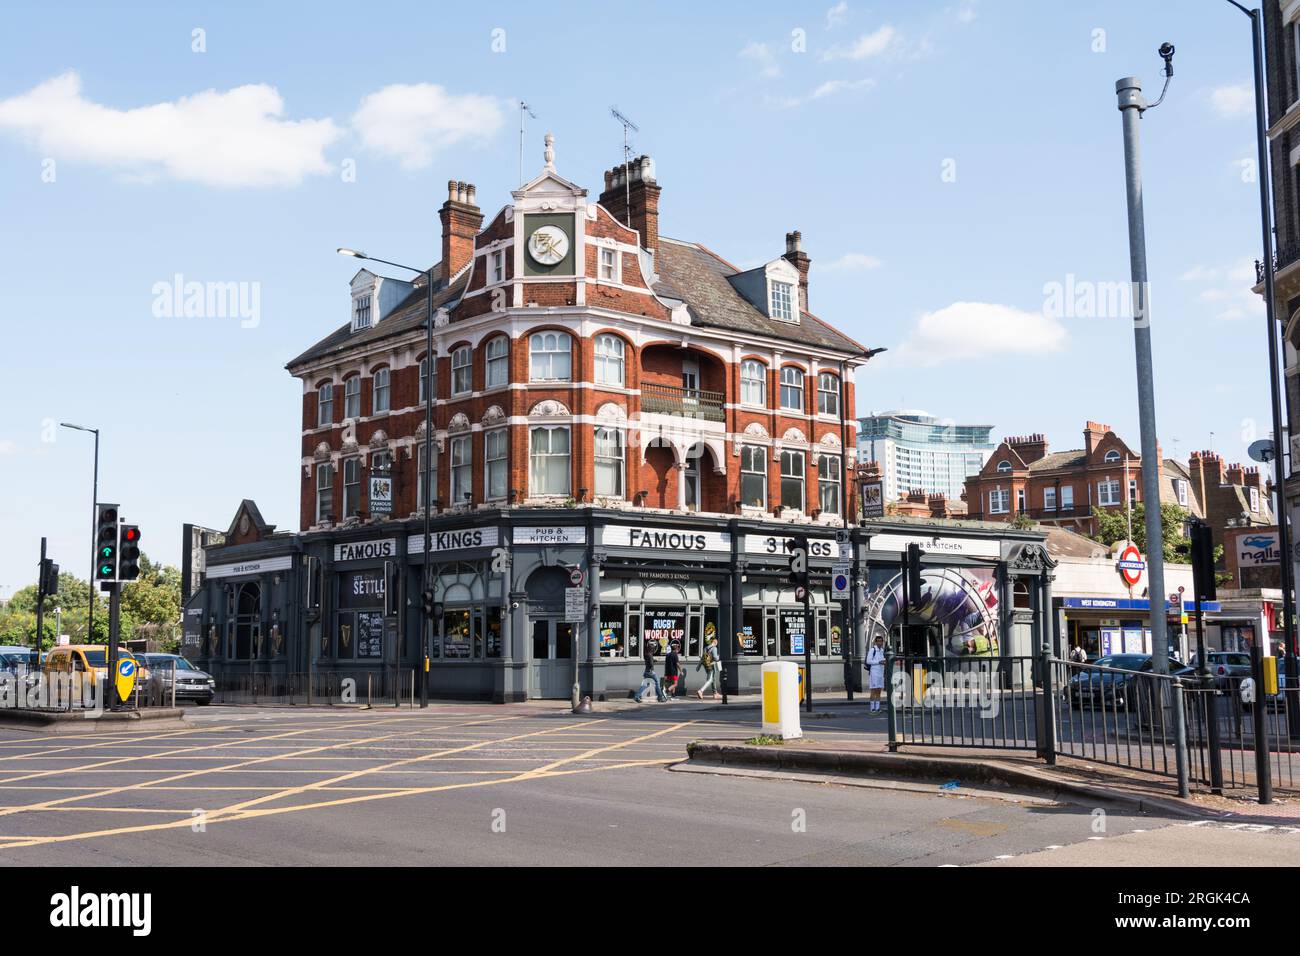 Famous Three Kings public house (formerly Nashville Rooms music venue), North End Road, Fulham, London, W14, England, U.K. Stock Photo